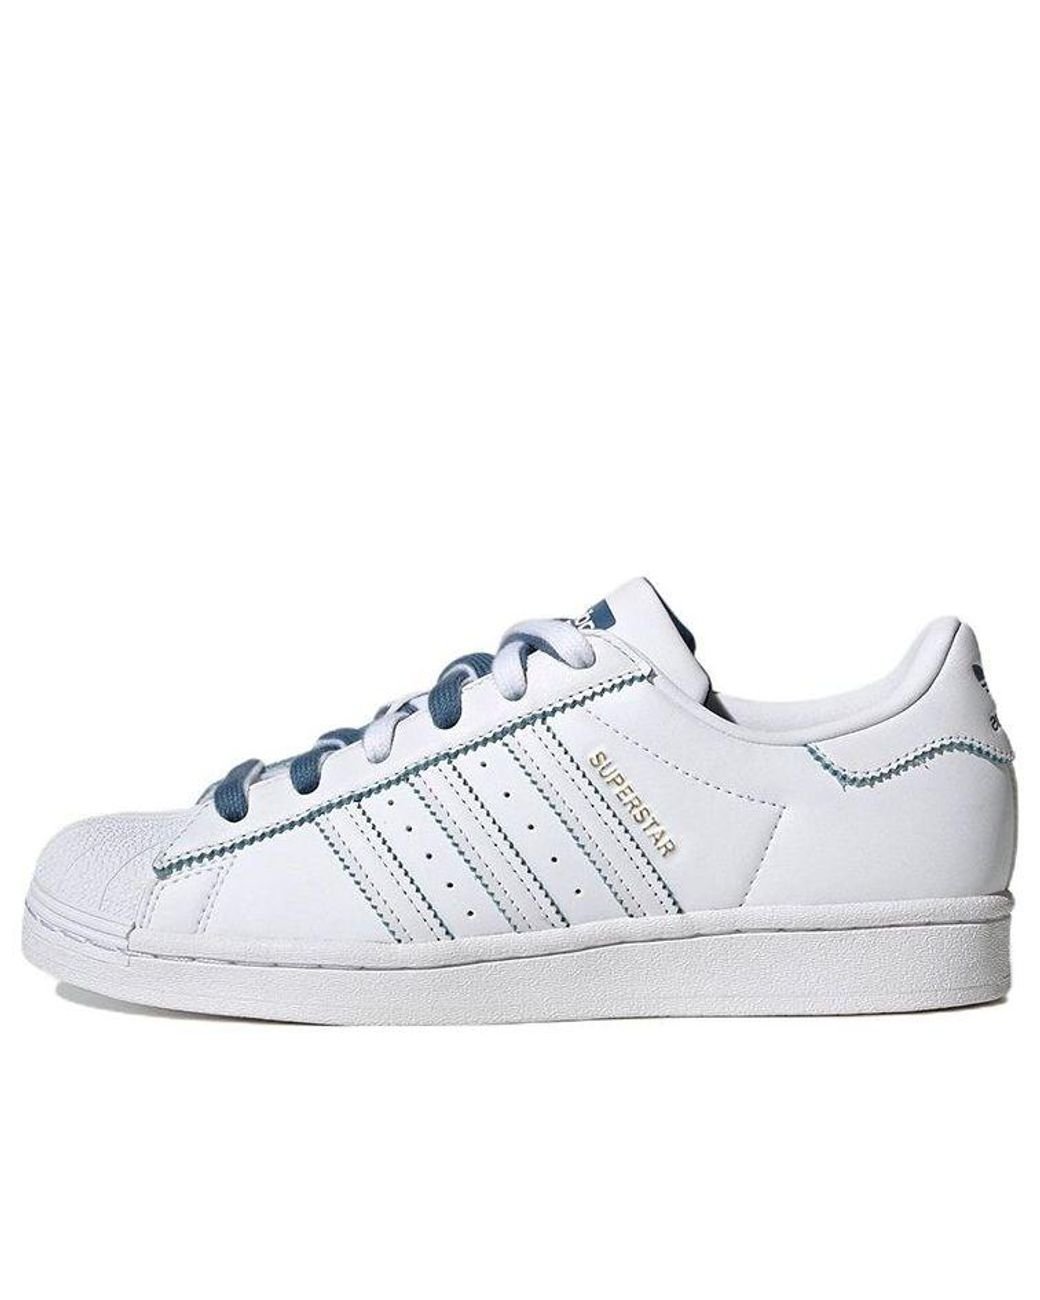 adidas Originals Superstar Casual Wear-resistant Shoes White Lyst